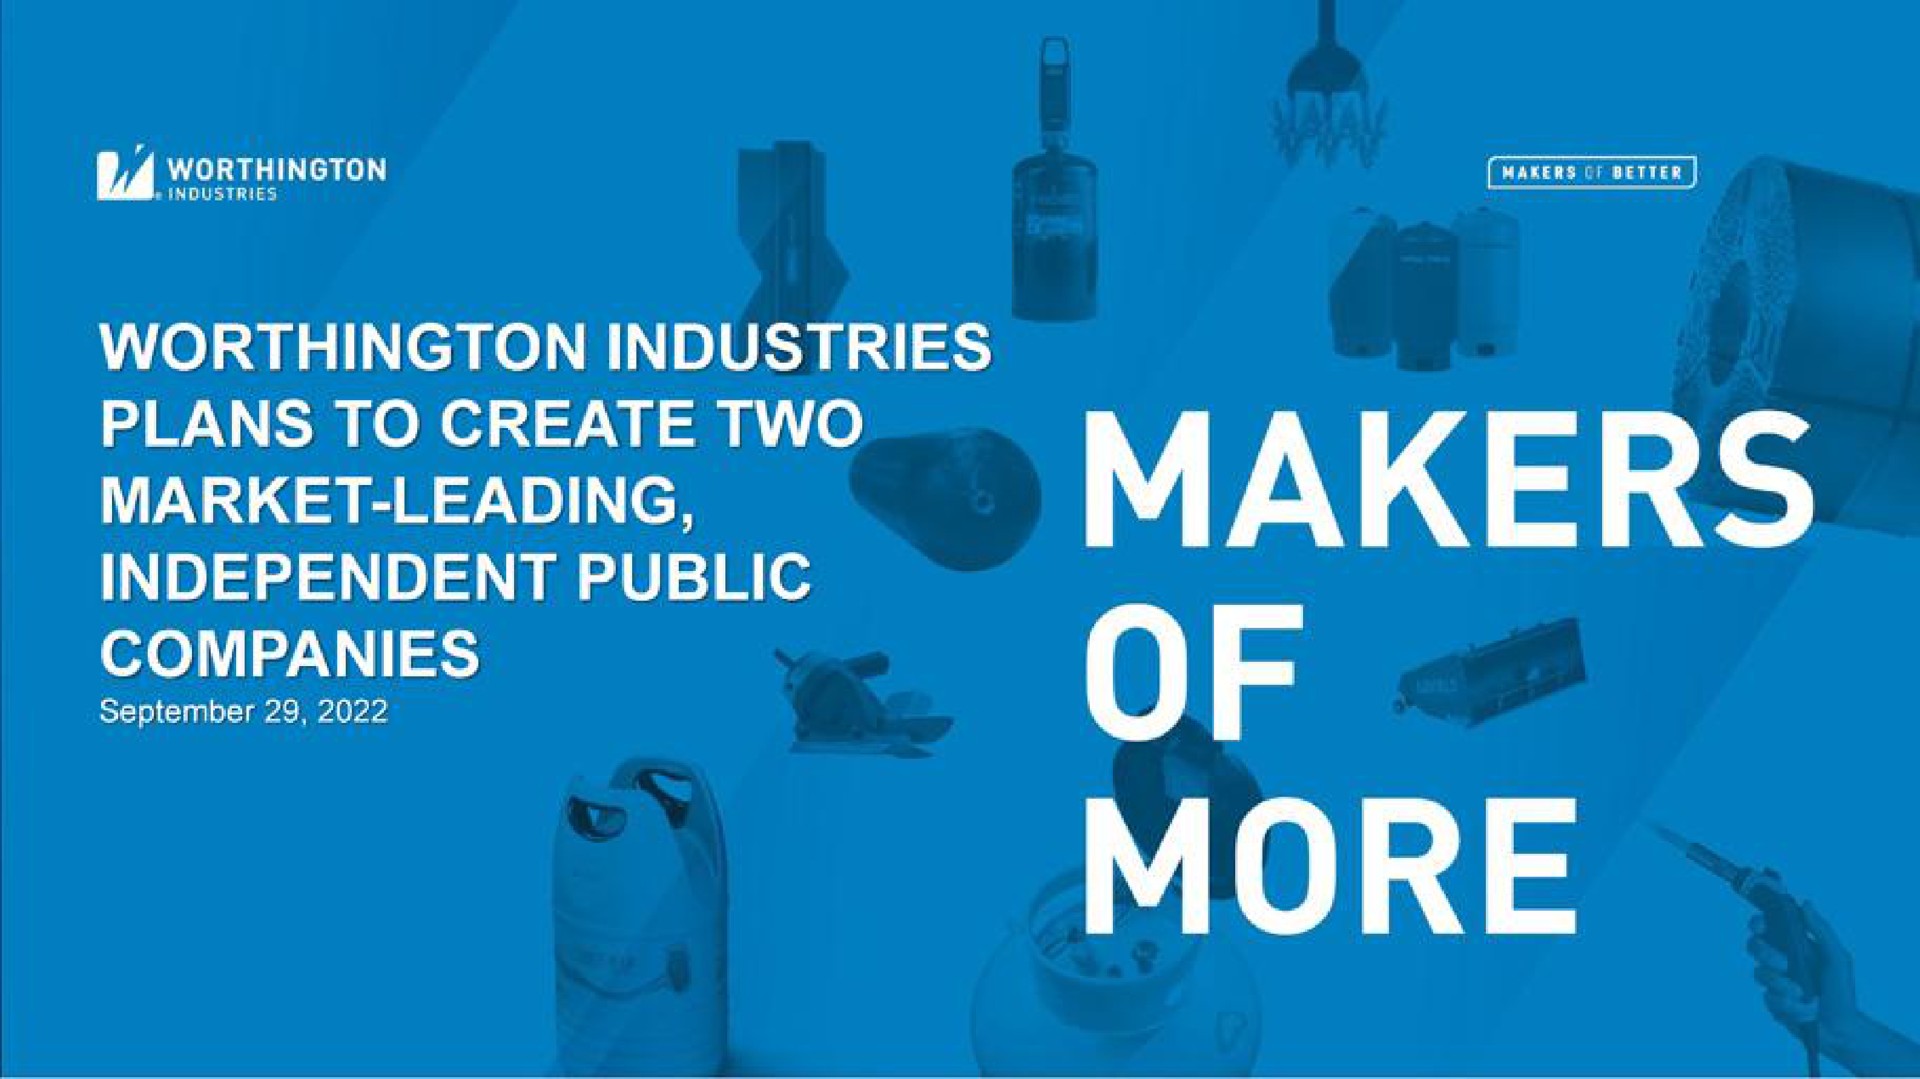 industries plans to create two independent public makers a more | Worthington Industries